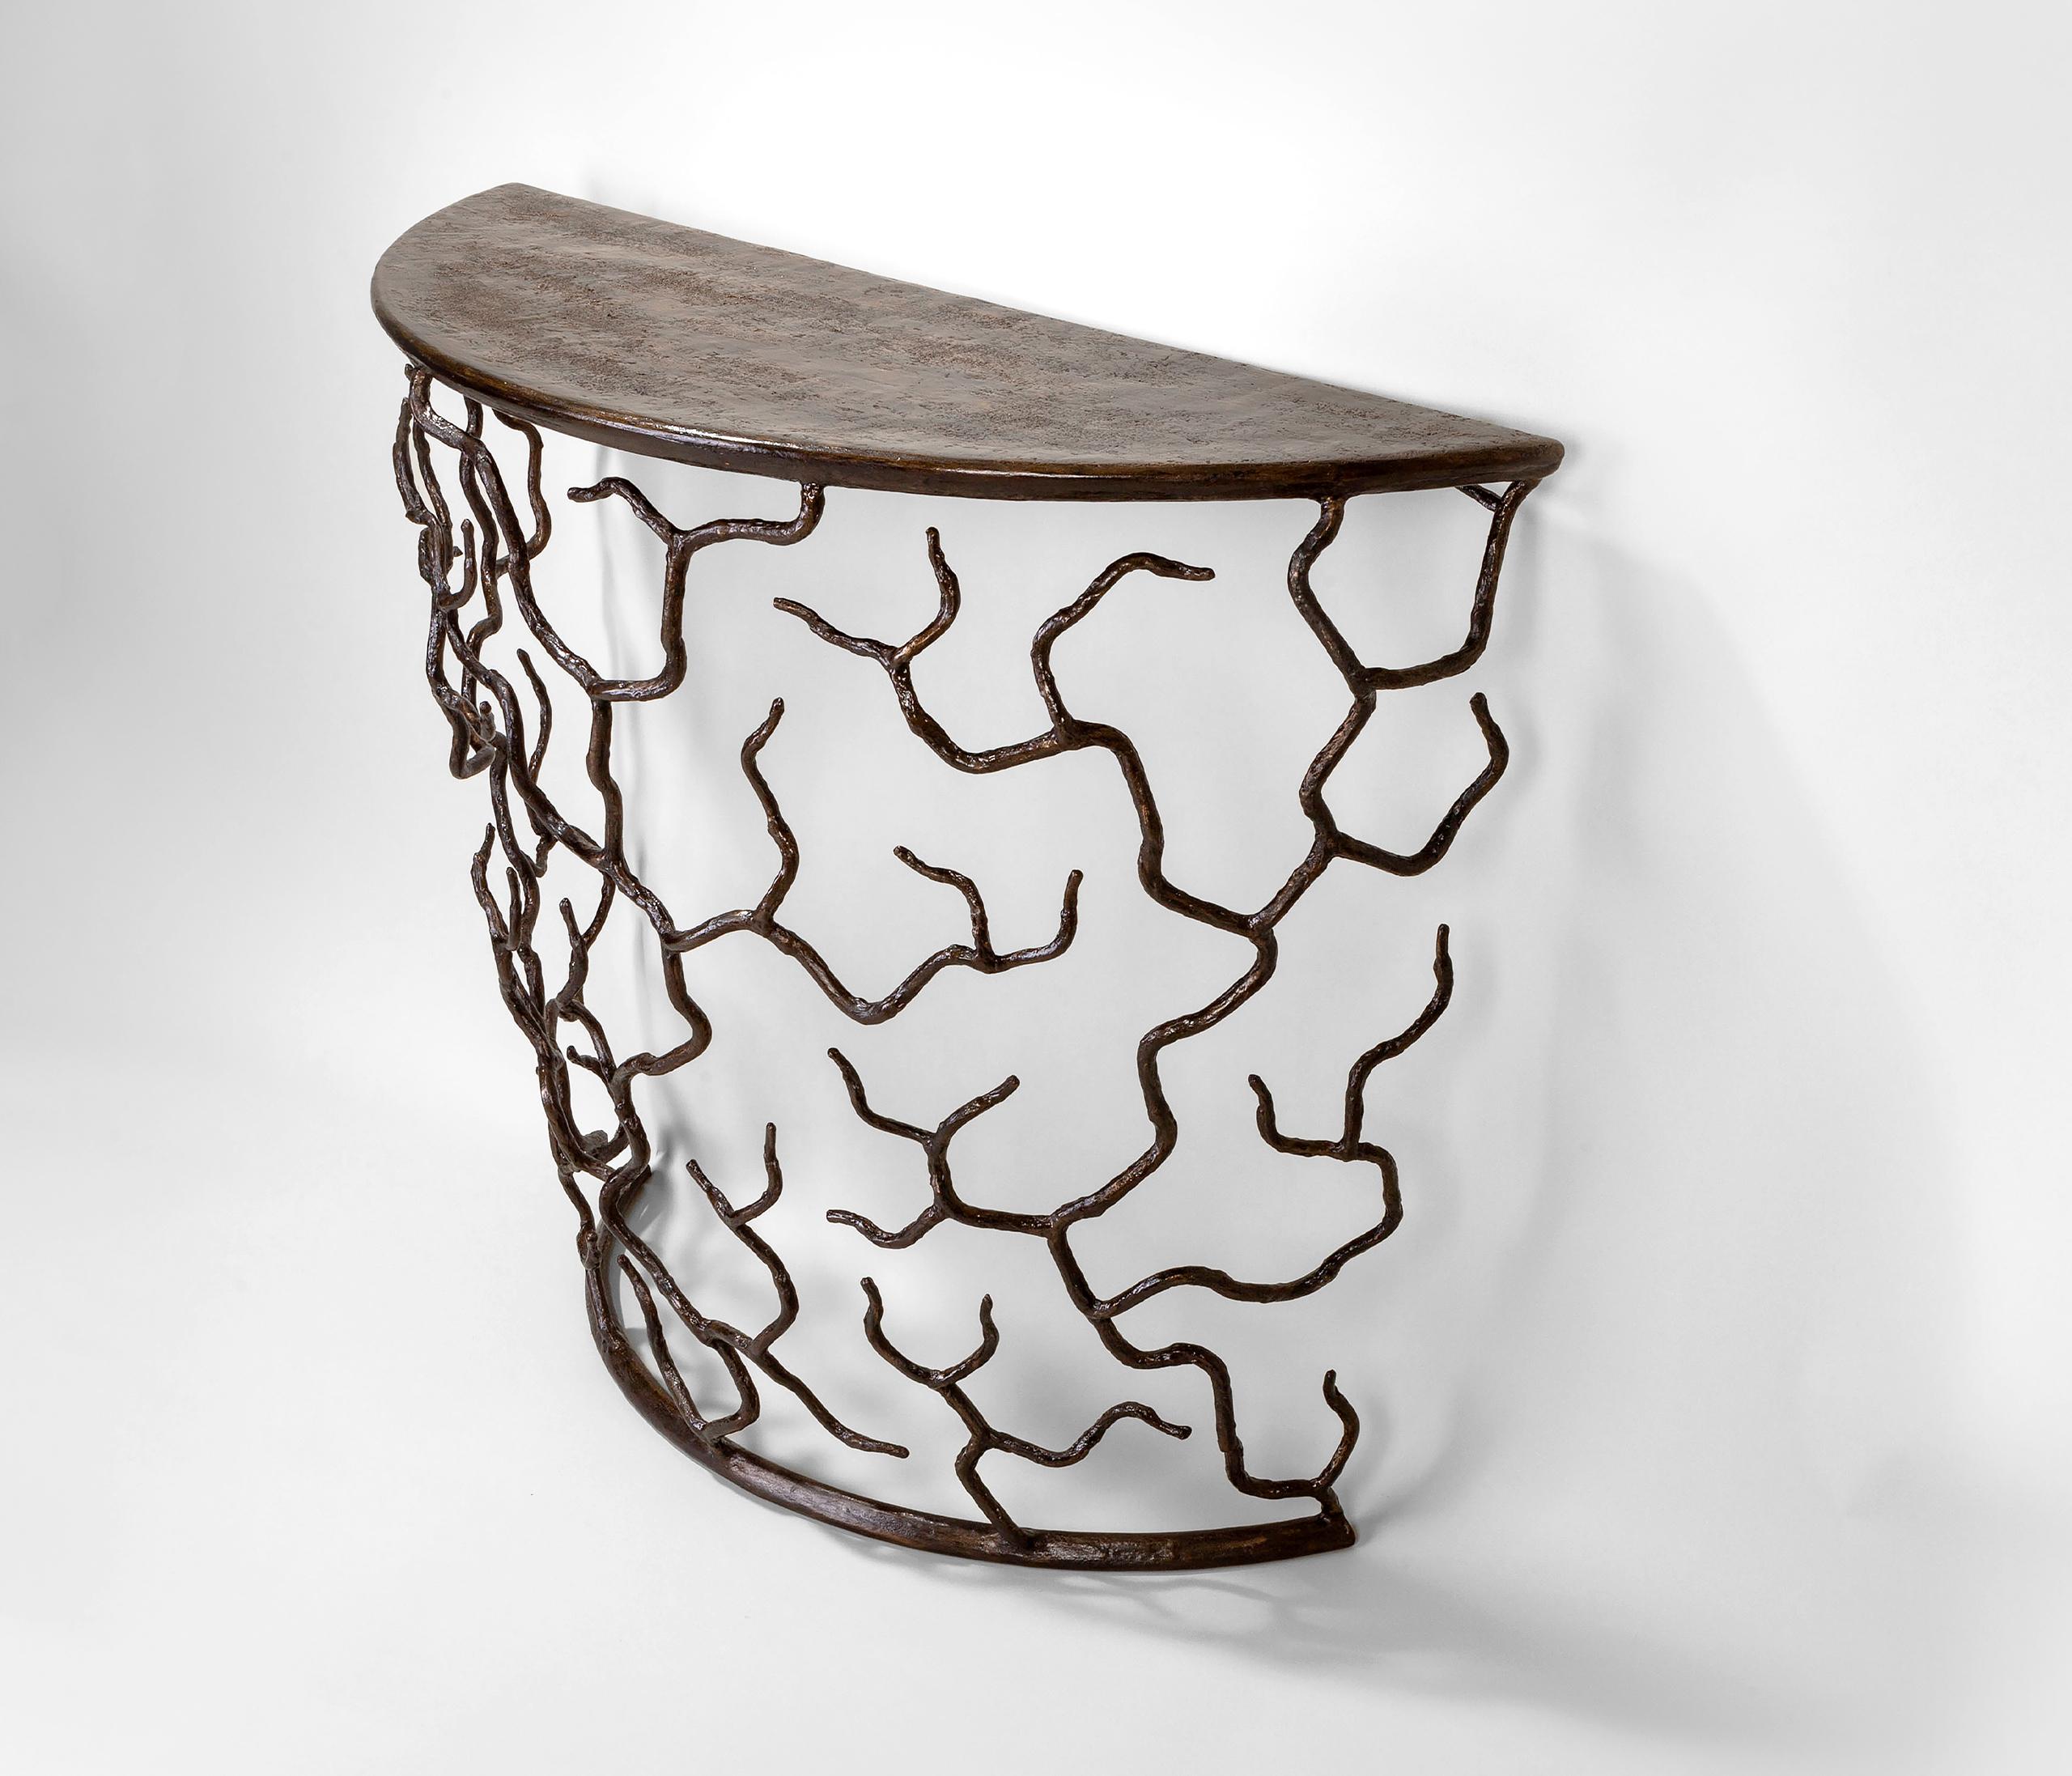 Organic forms and natural motifs. The Etna console table is individually hammered and hand formed, then beautifully sculpted by layers and layers of plaster. Each piece has been skillfully finished to resemble the texture of tree bark. The Top is